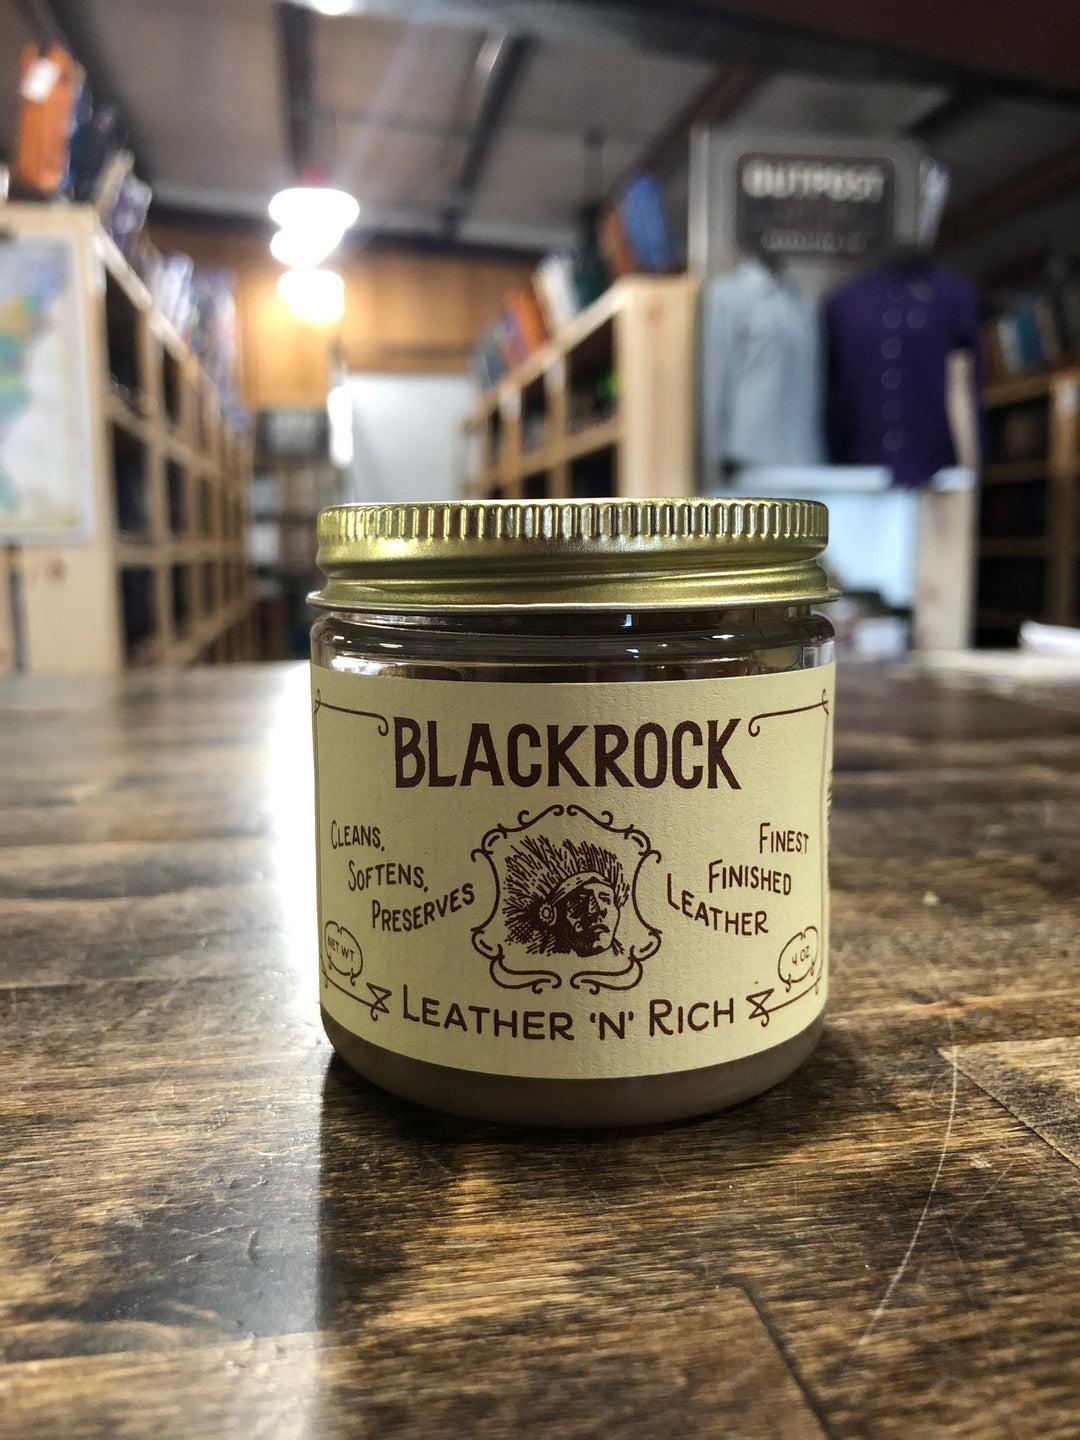 Black Rock Leather 'N' Rich leather conditioner